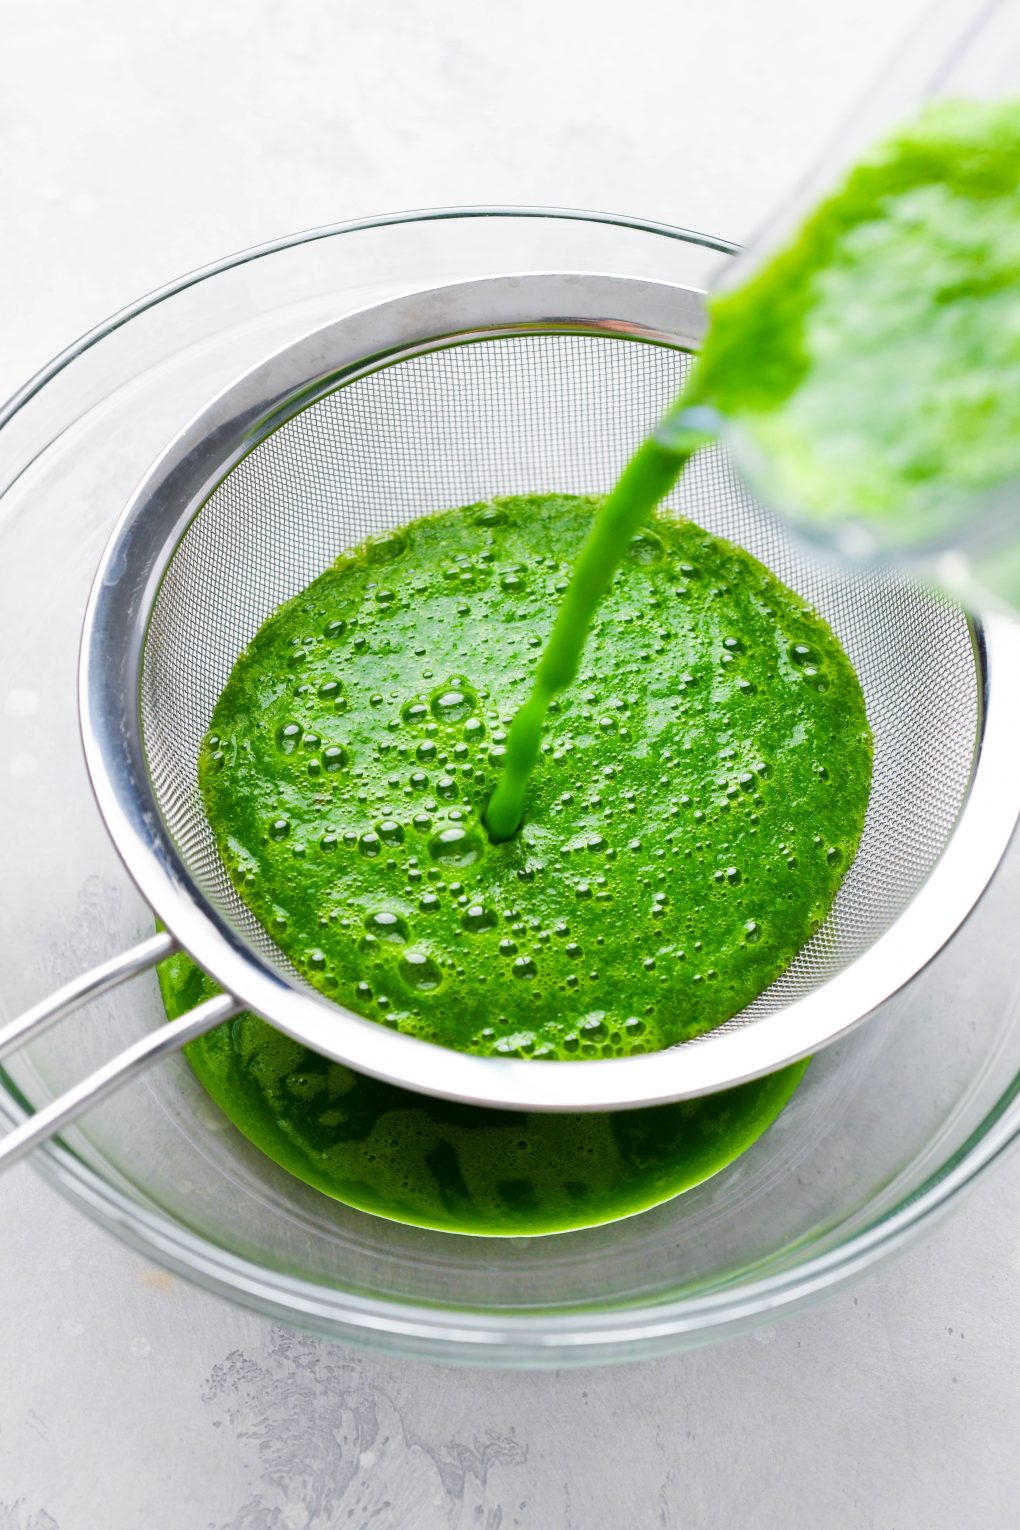 Image of pouring blended green juice into a strainer positioned over a large bowl to strain out the solids.